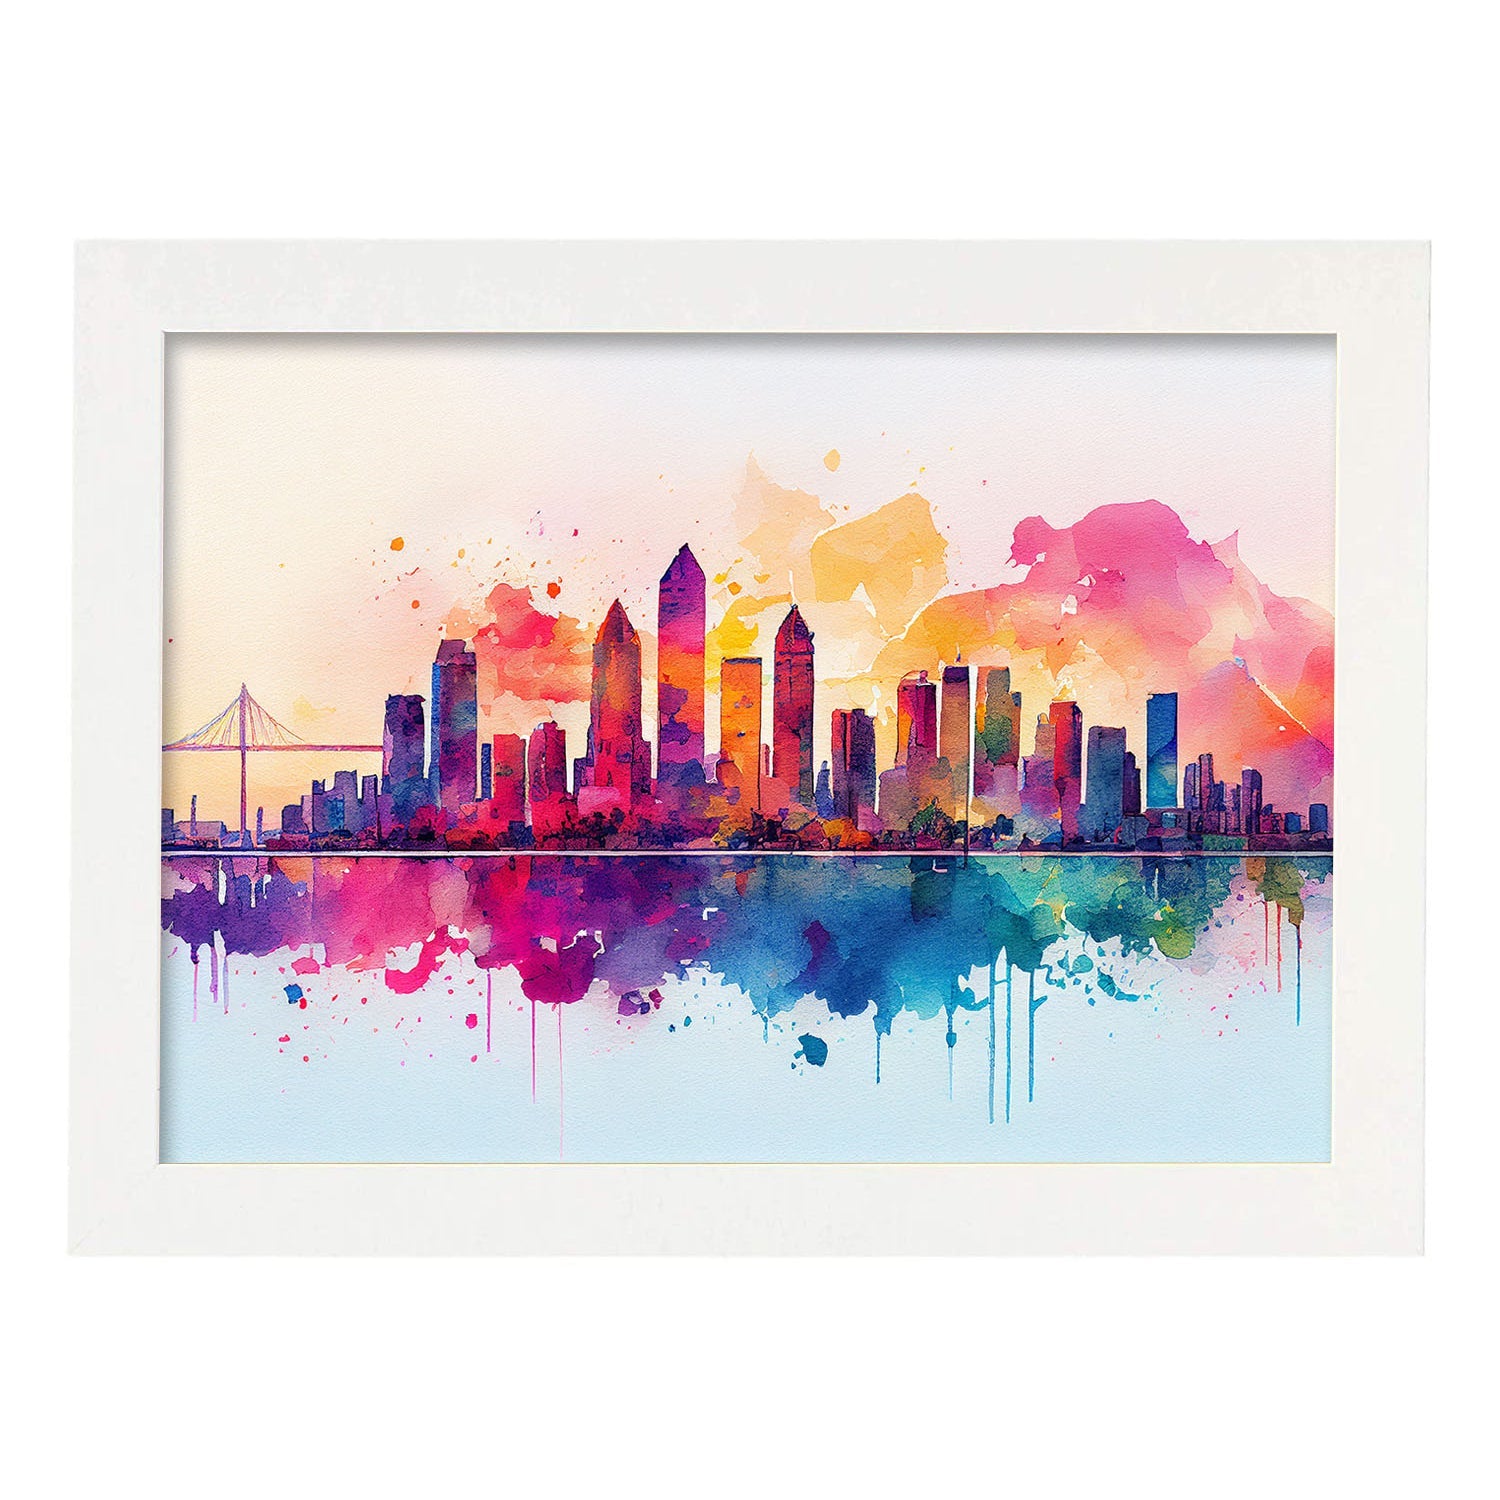 Nacnic watercolor of a skyline of the city of San Diego. Aesthetic Wall Art Prints for Bedroom or Living Room Design.-Artwork-Nacnic-A4-Marco Blanco-Nacnic Estudio SL